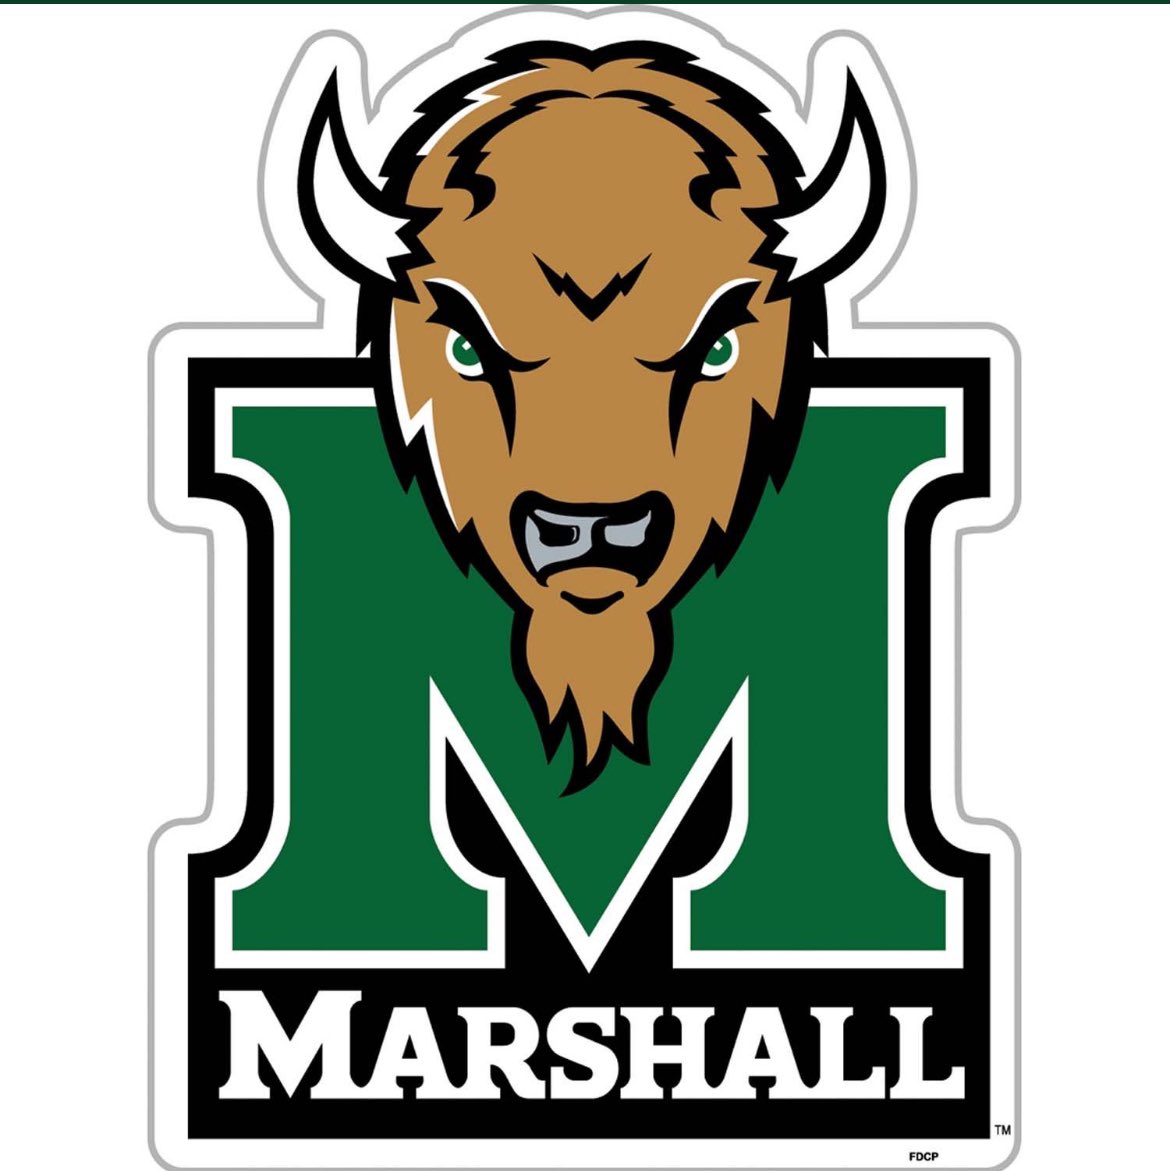 I am blessed to receive my first D1 offer from Marshall University 🟢⚪️AGTG💯!! @CoachRPringle @LakeGibsonFB @HerdFB @street_ralph @CoachHuff @oneway7on7 @QuintonBoatwri3 @CoachBoatman @PrepRedzoneFL @THEPLATFORMDR @RealNews102 @SopcQuinton @H2_Recruiting @Anthony34352017